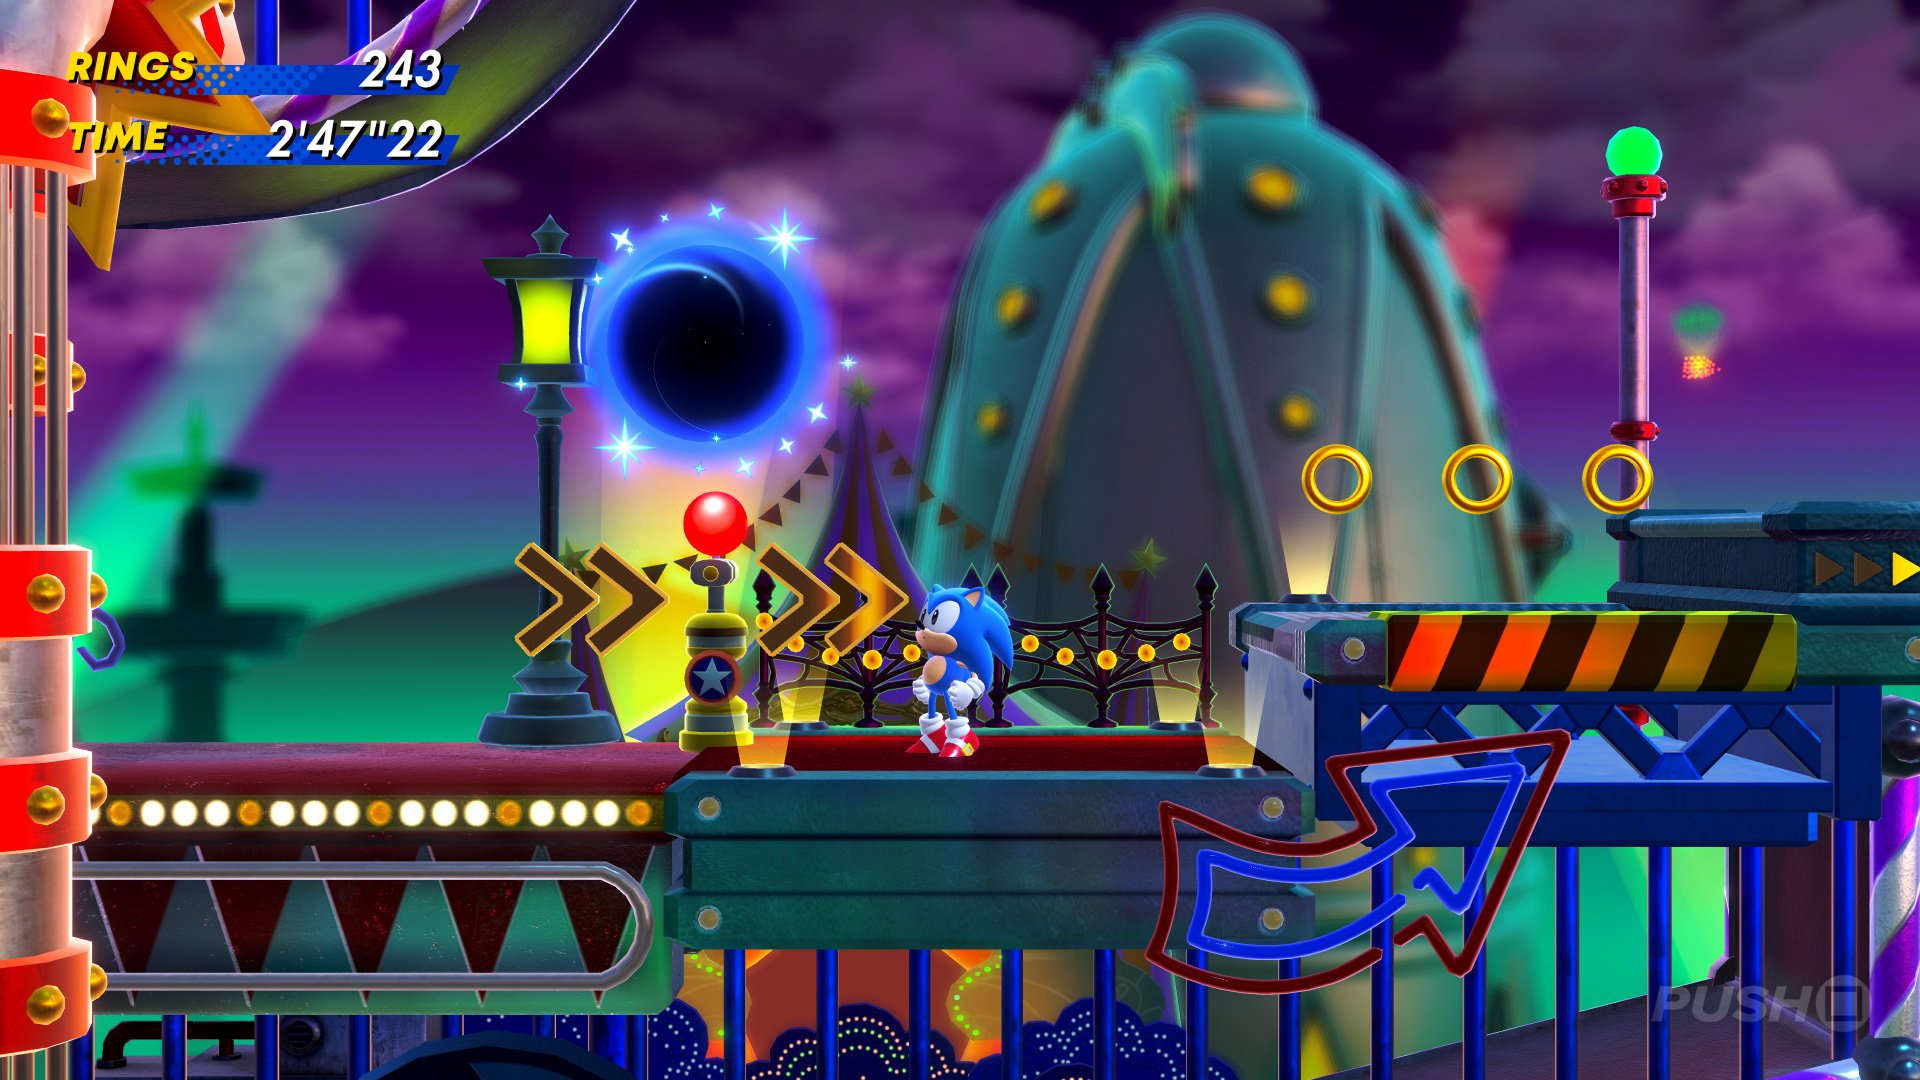 Sonic Superstars PlayStation 5 Review